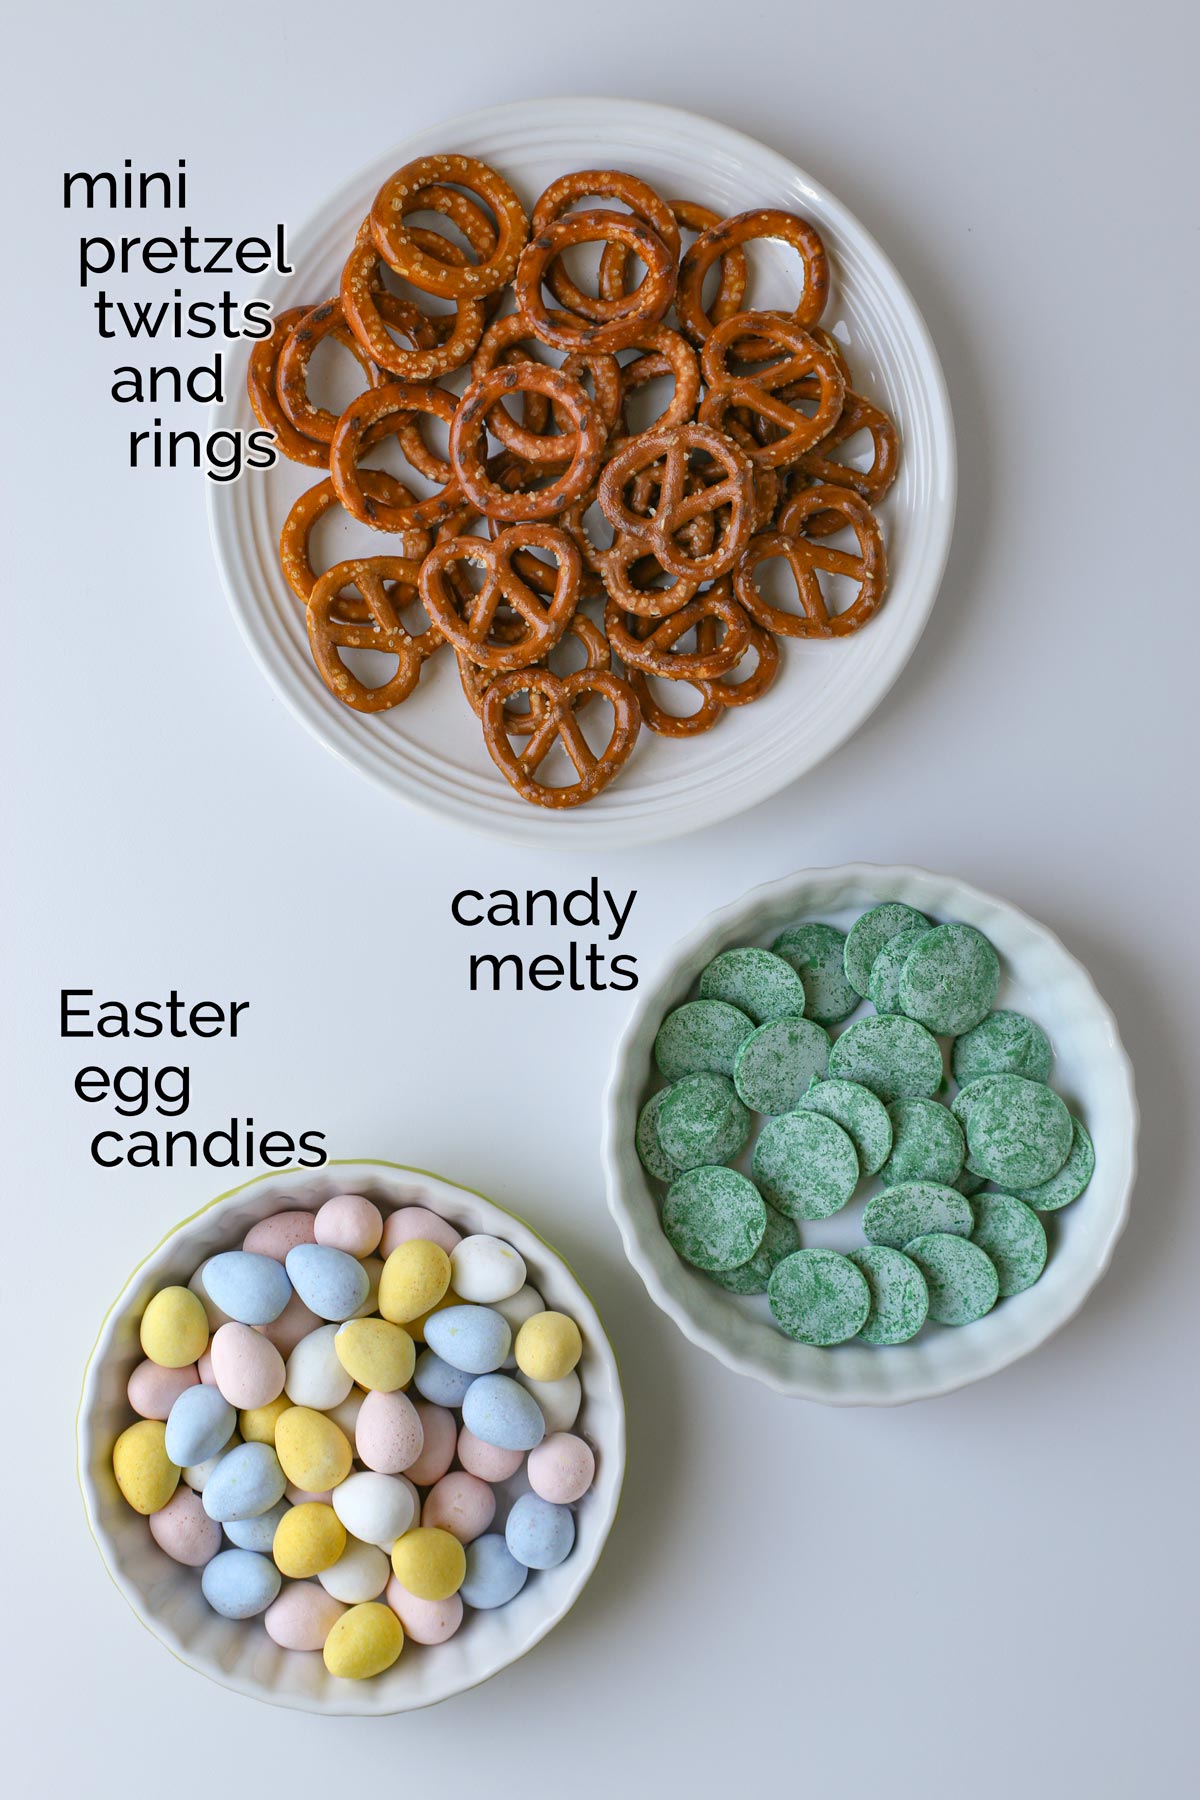 ingredients for Easter pretzels laid out on white table.